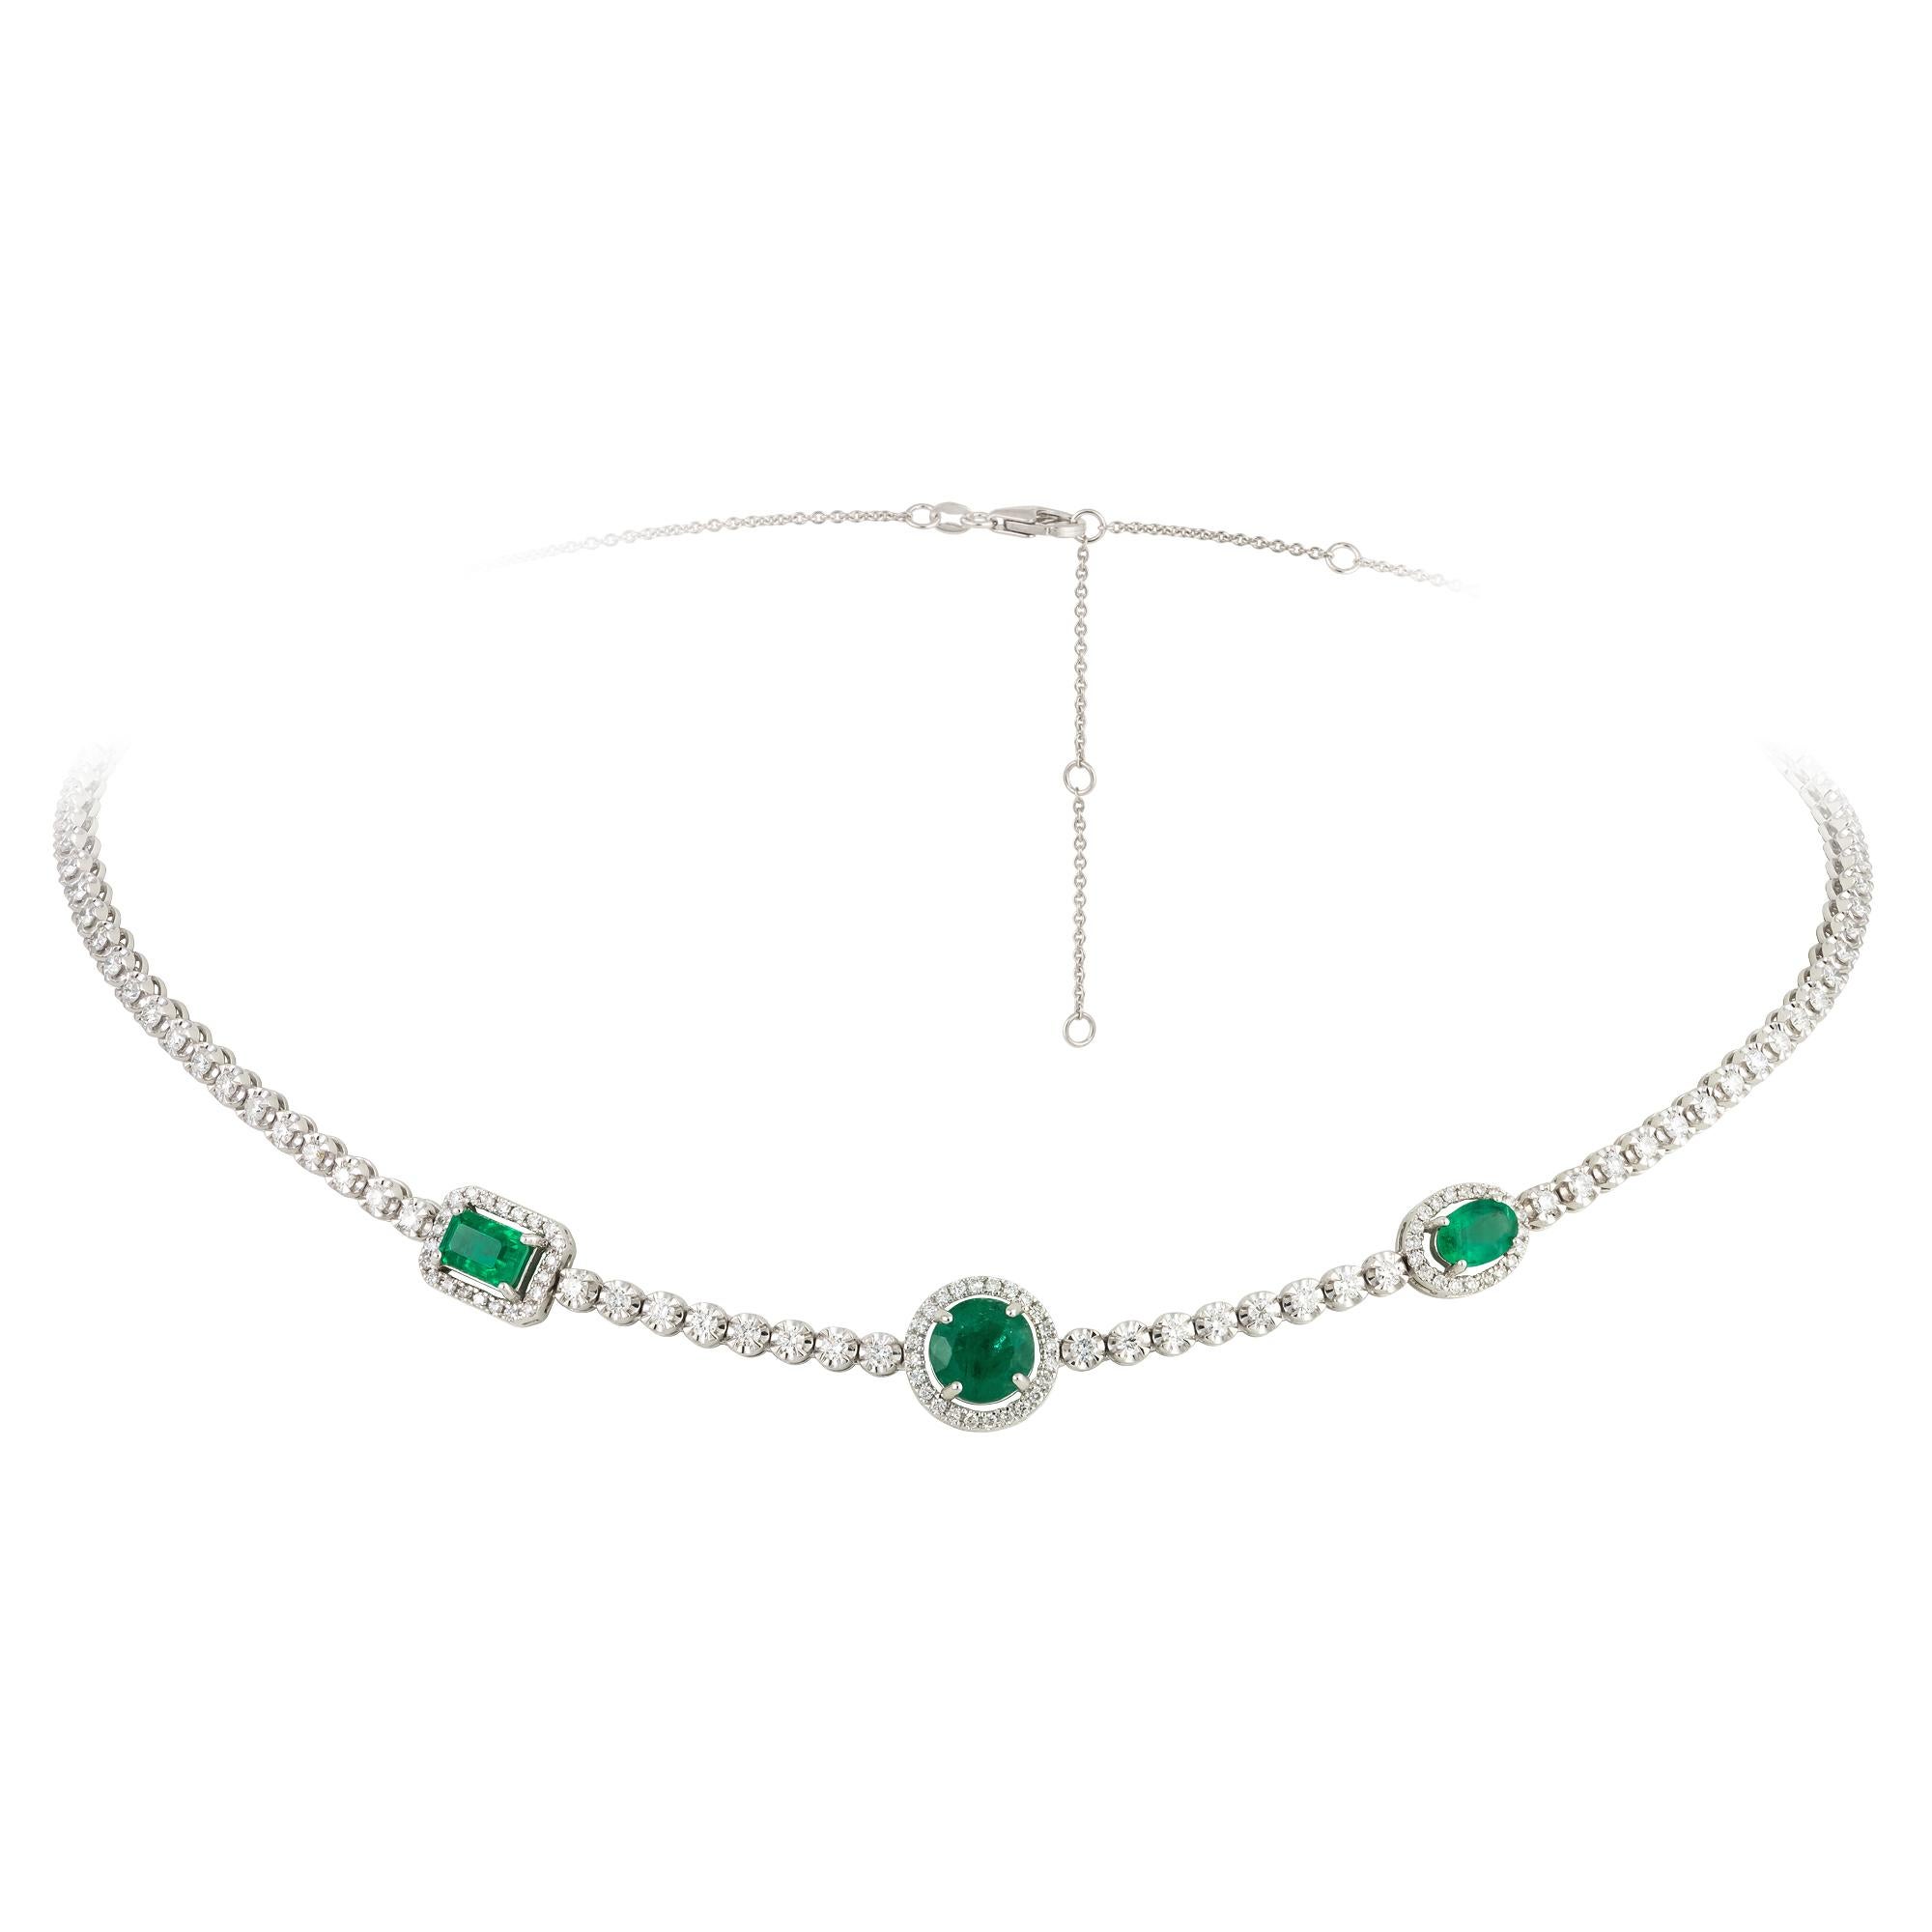 Modern Choker White Gold 18K Necklace Emerald Diamond For Her For Sale